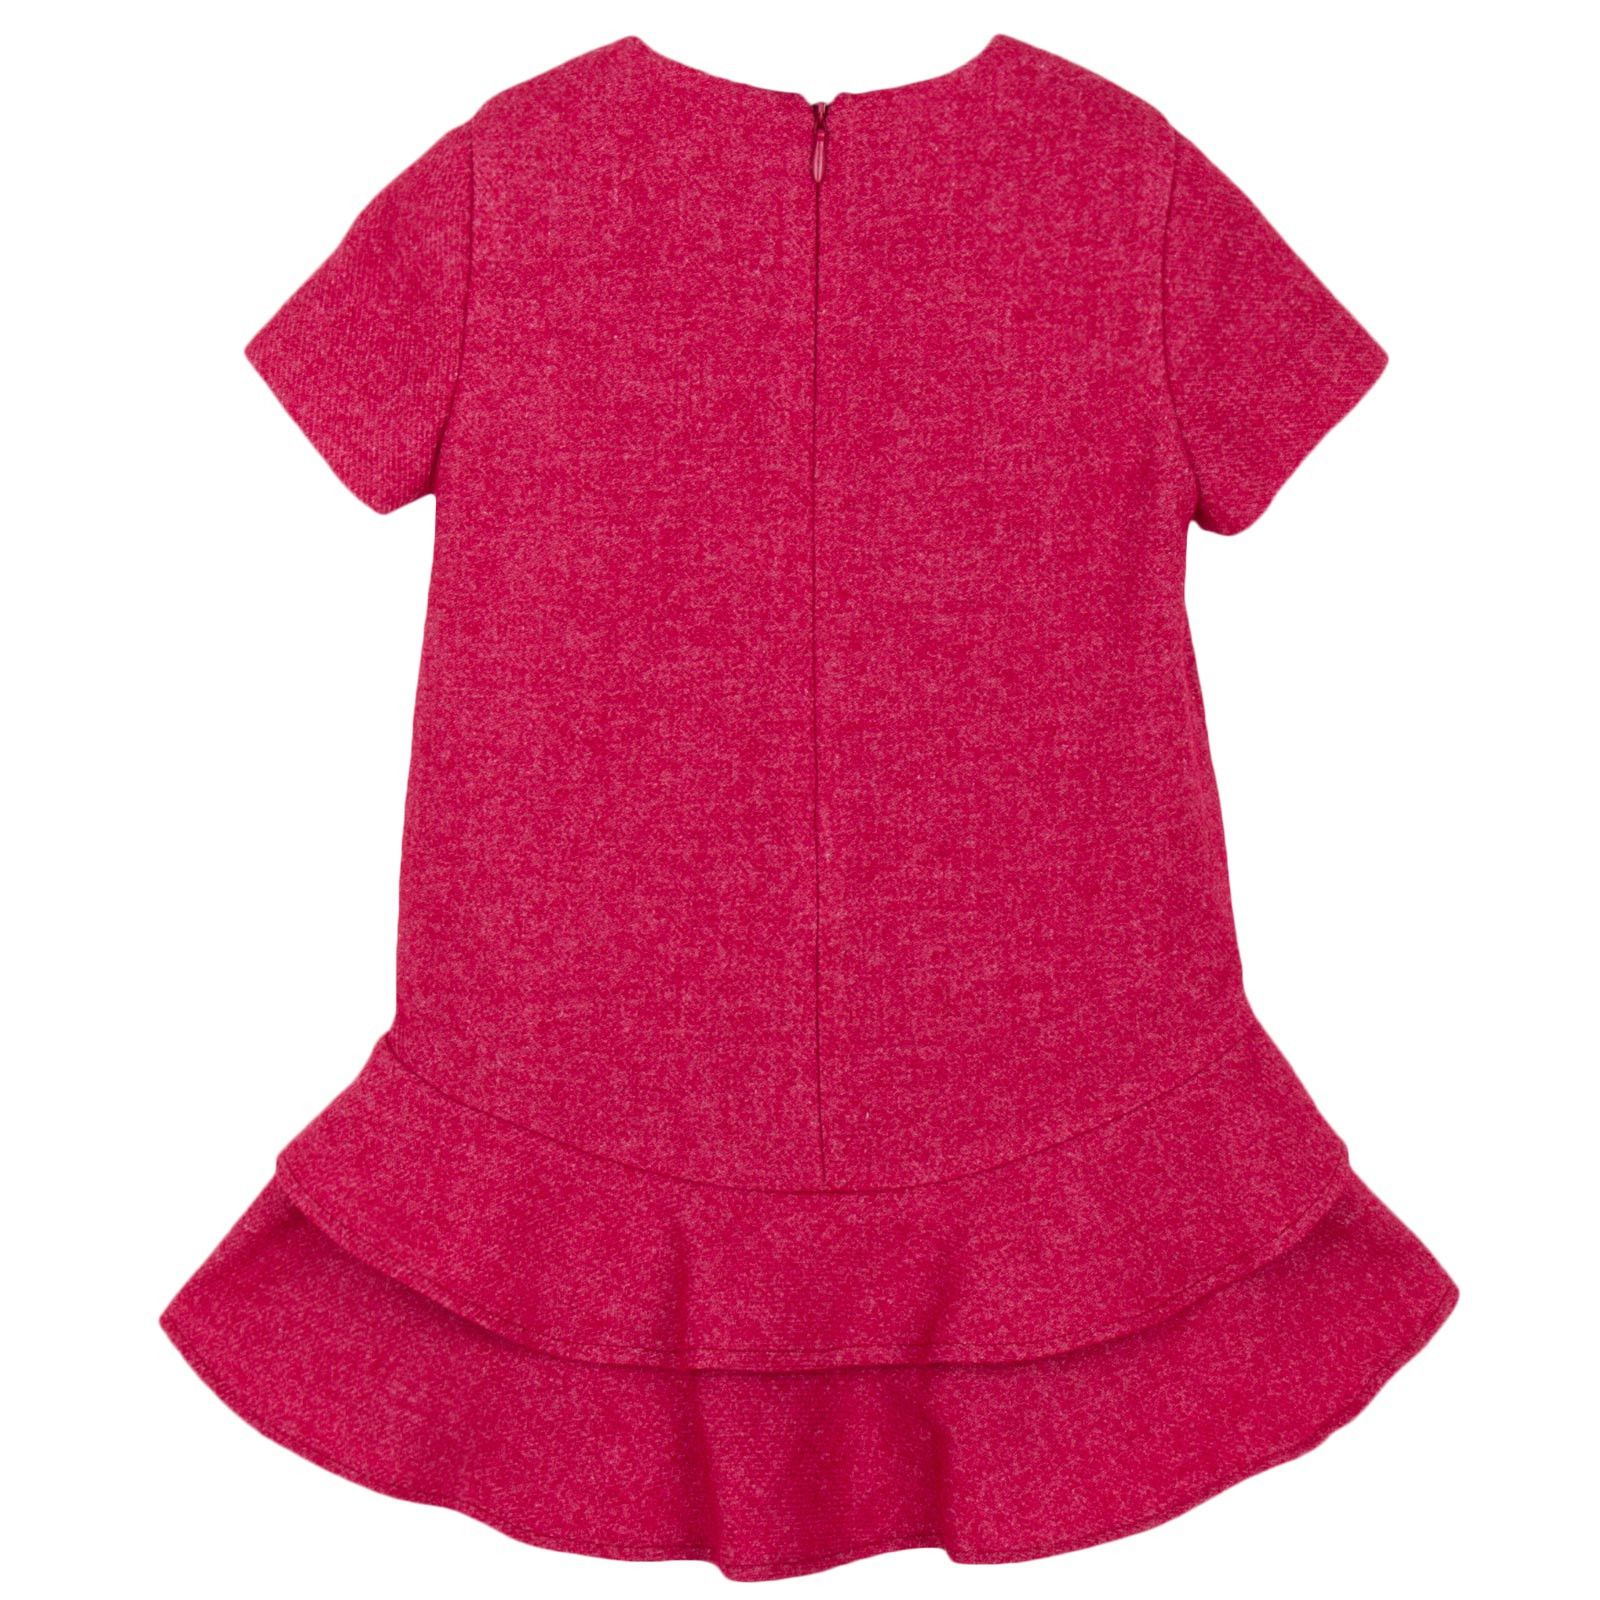 Girls Dark Red Dress With Zipper At The Back - CÉMAROSE | Children's Fashion Store - 2